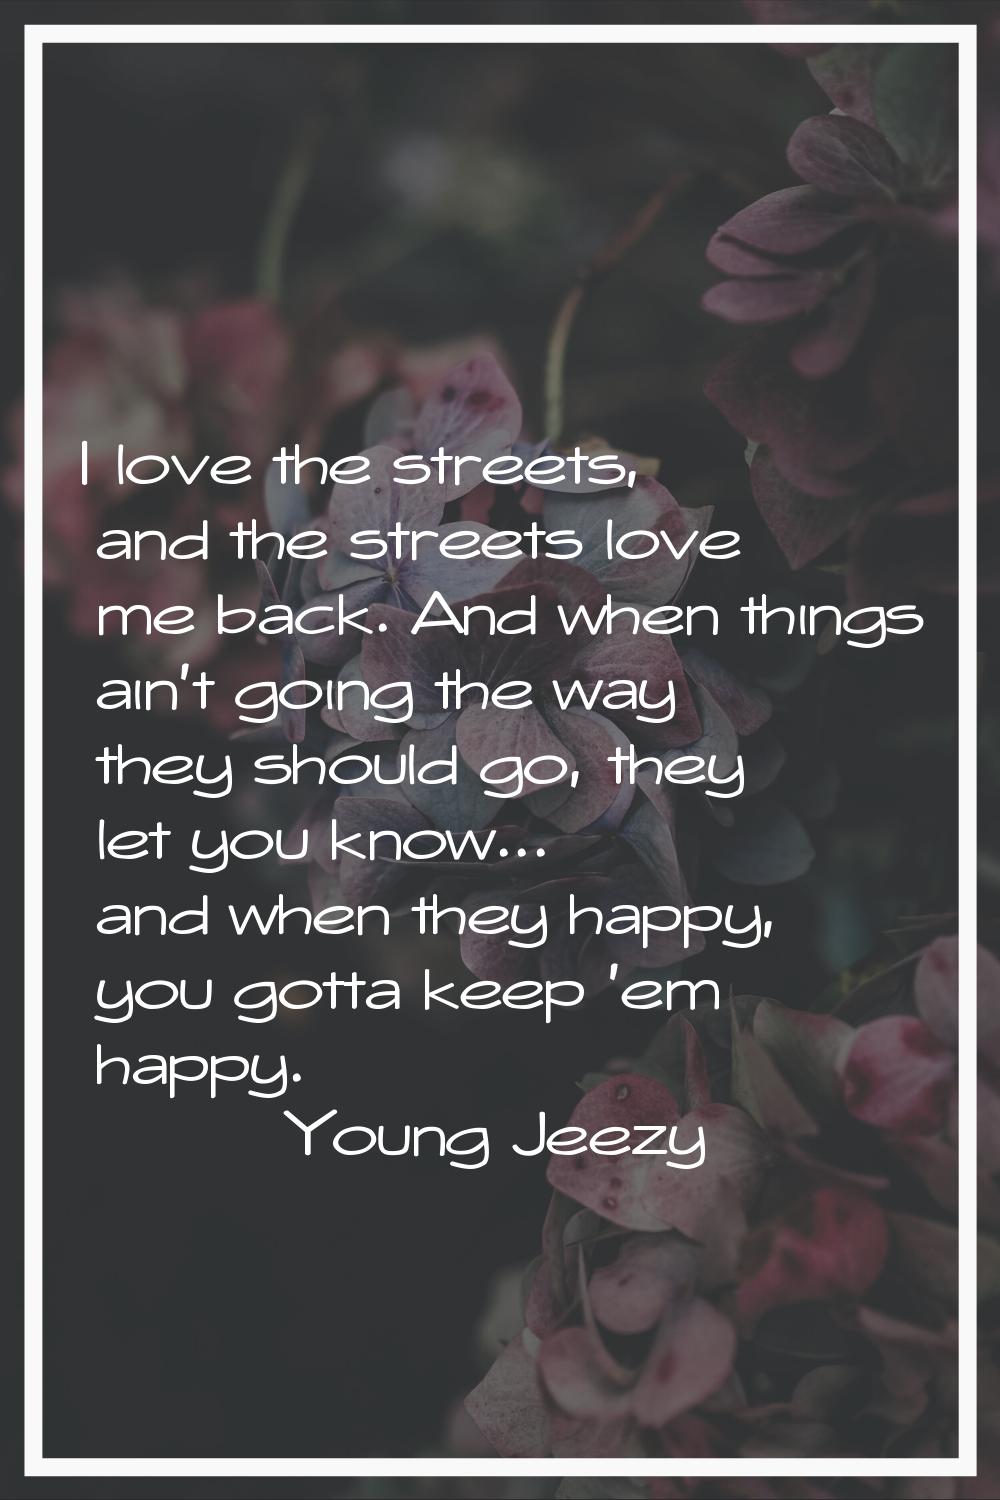 I love the streets, and the streets love me back. And when things ain't going the way they should g